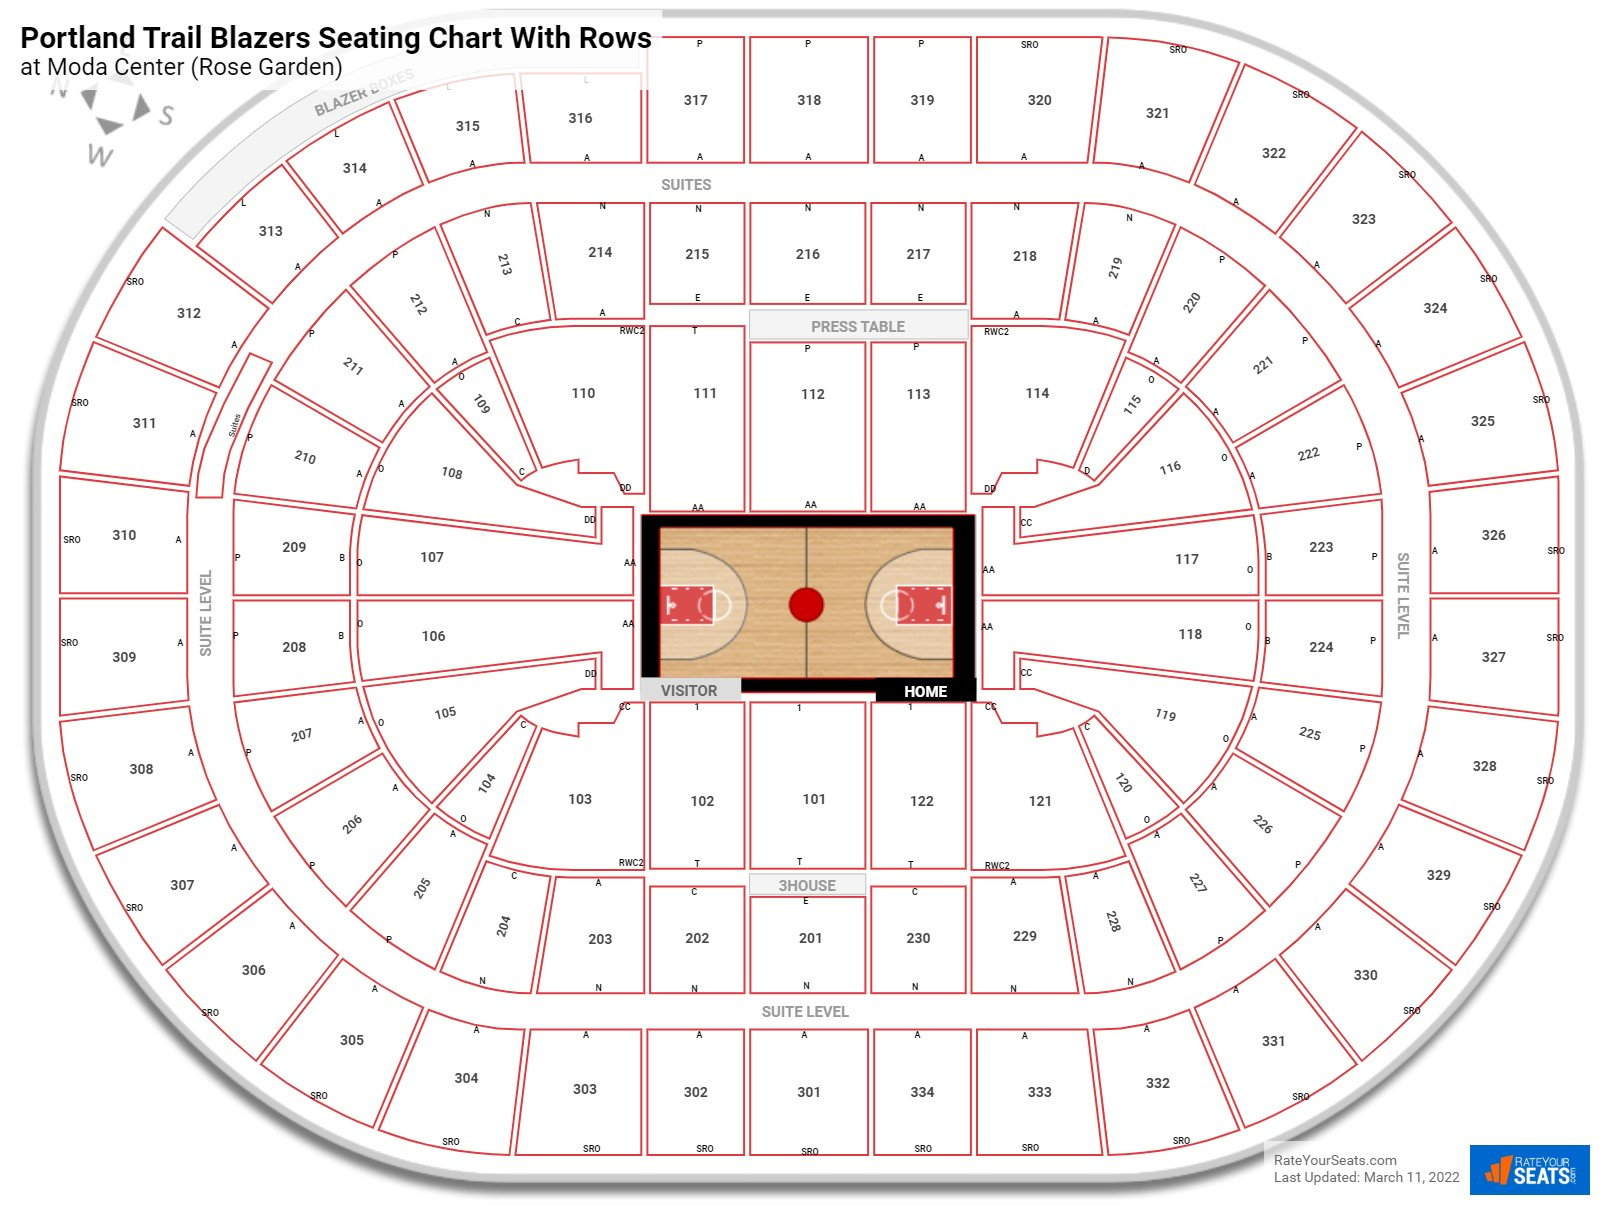 Moda Center (Rose Garden) seating chart with row numbers